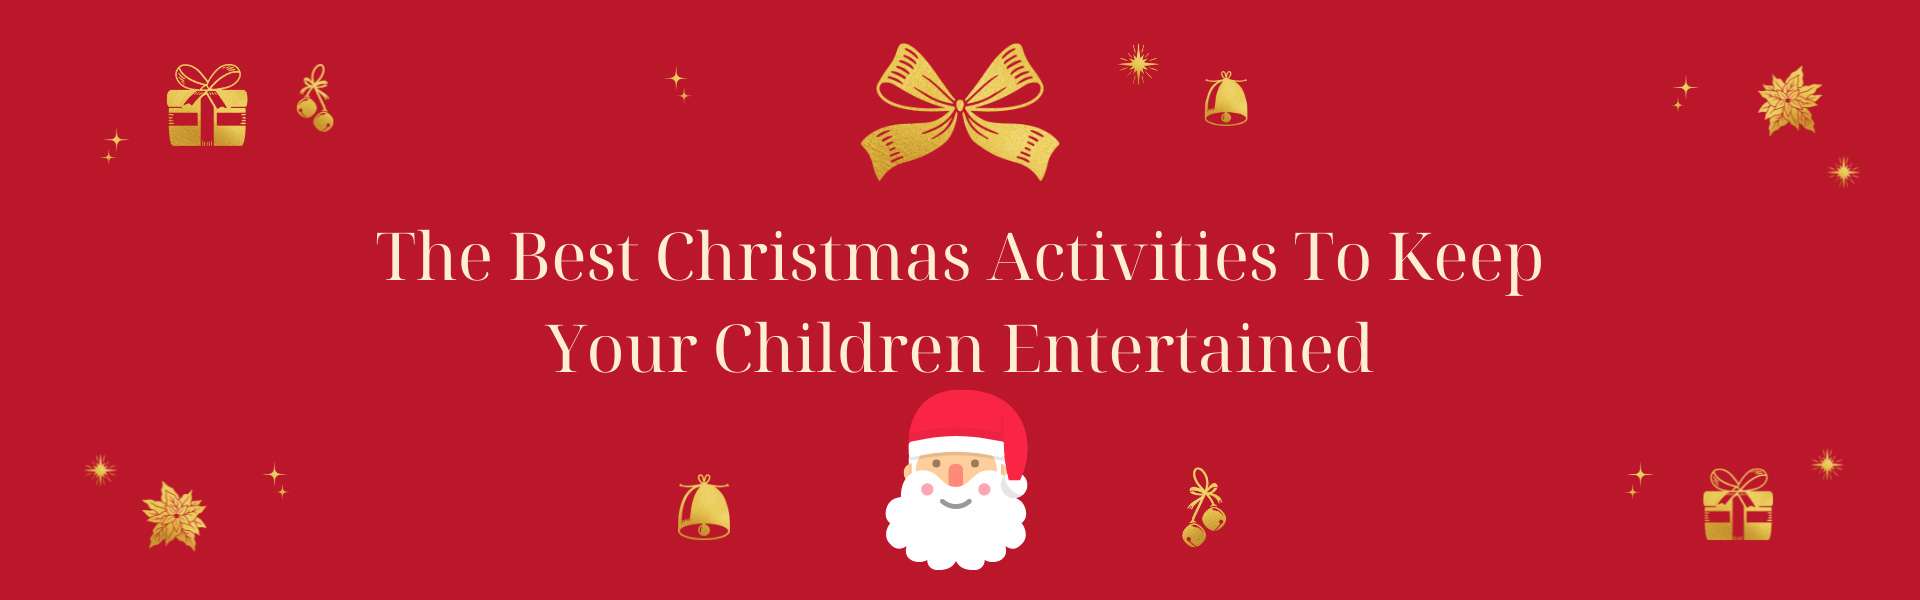 The Best Christmas Activities To Keep Your Children Entertained